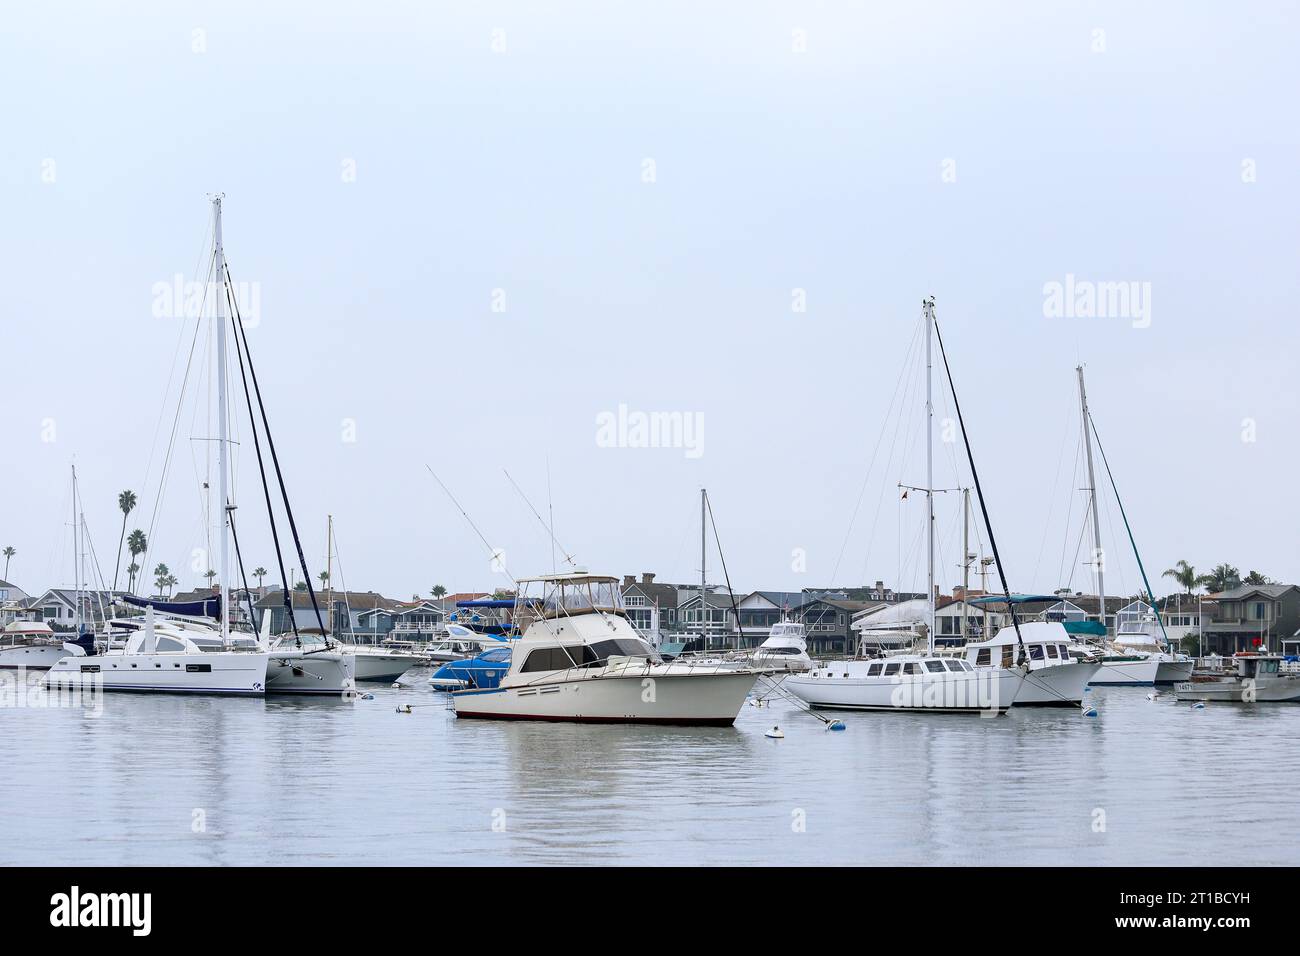 Boats and yachts on the coastline of Newport Beach, California on an overcast afternoon Stock Photo